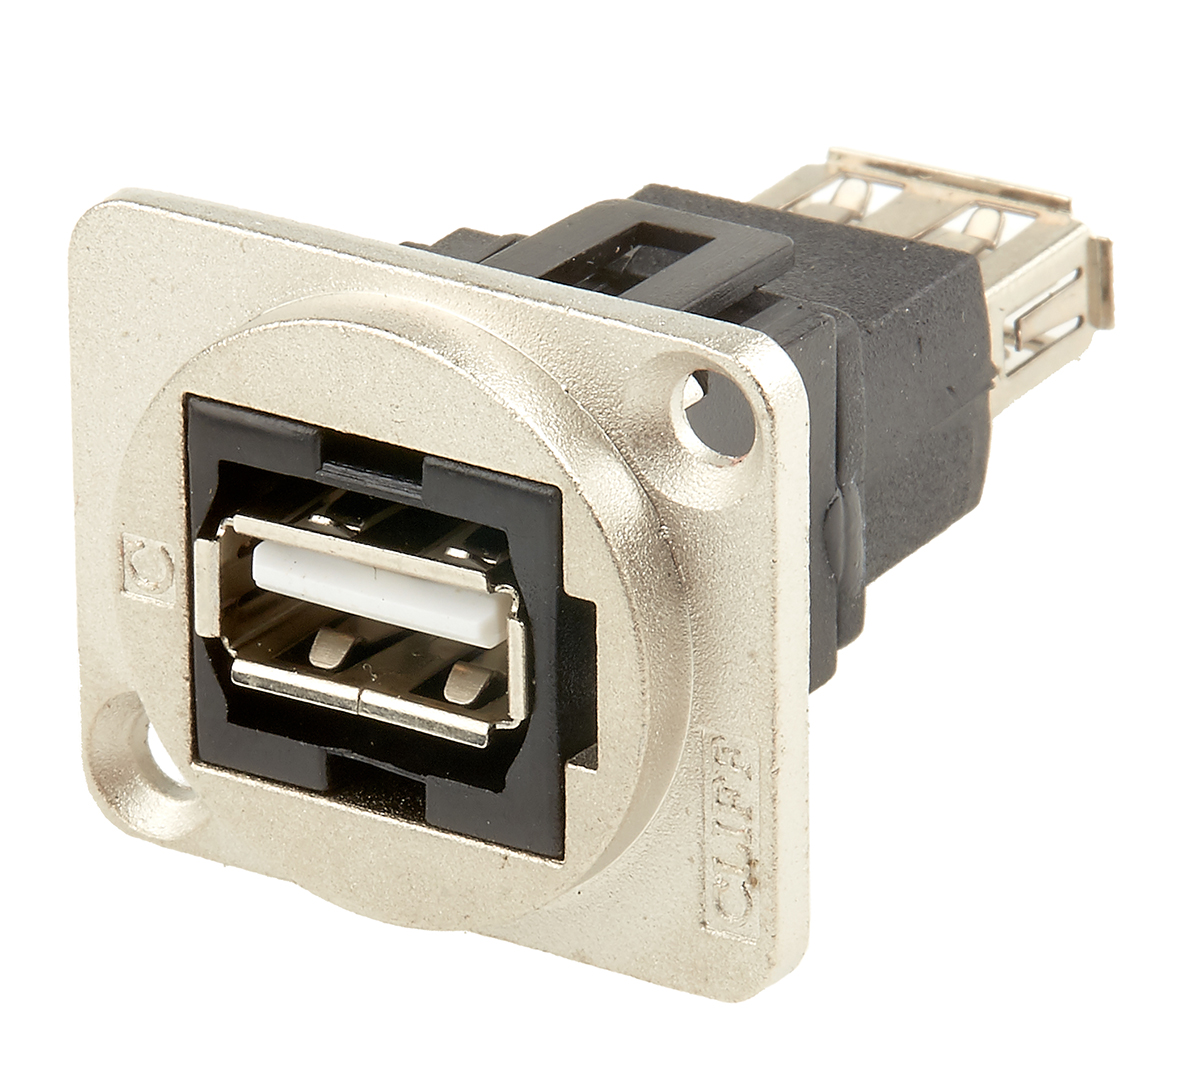 A Complete Guide to USB Connectors